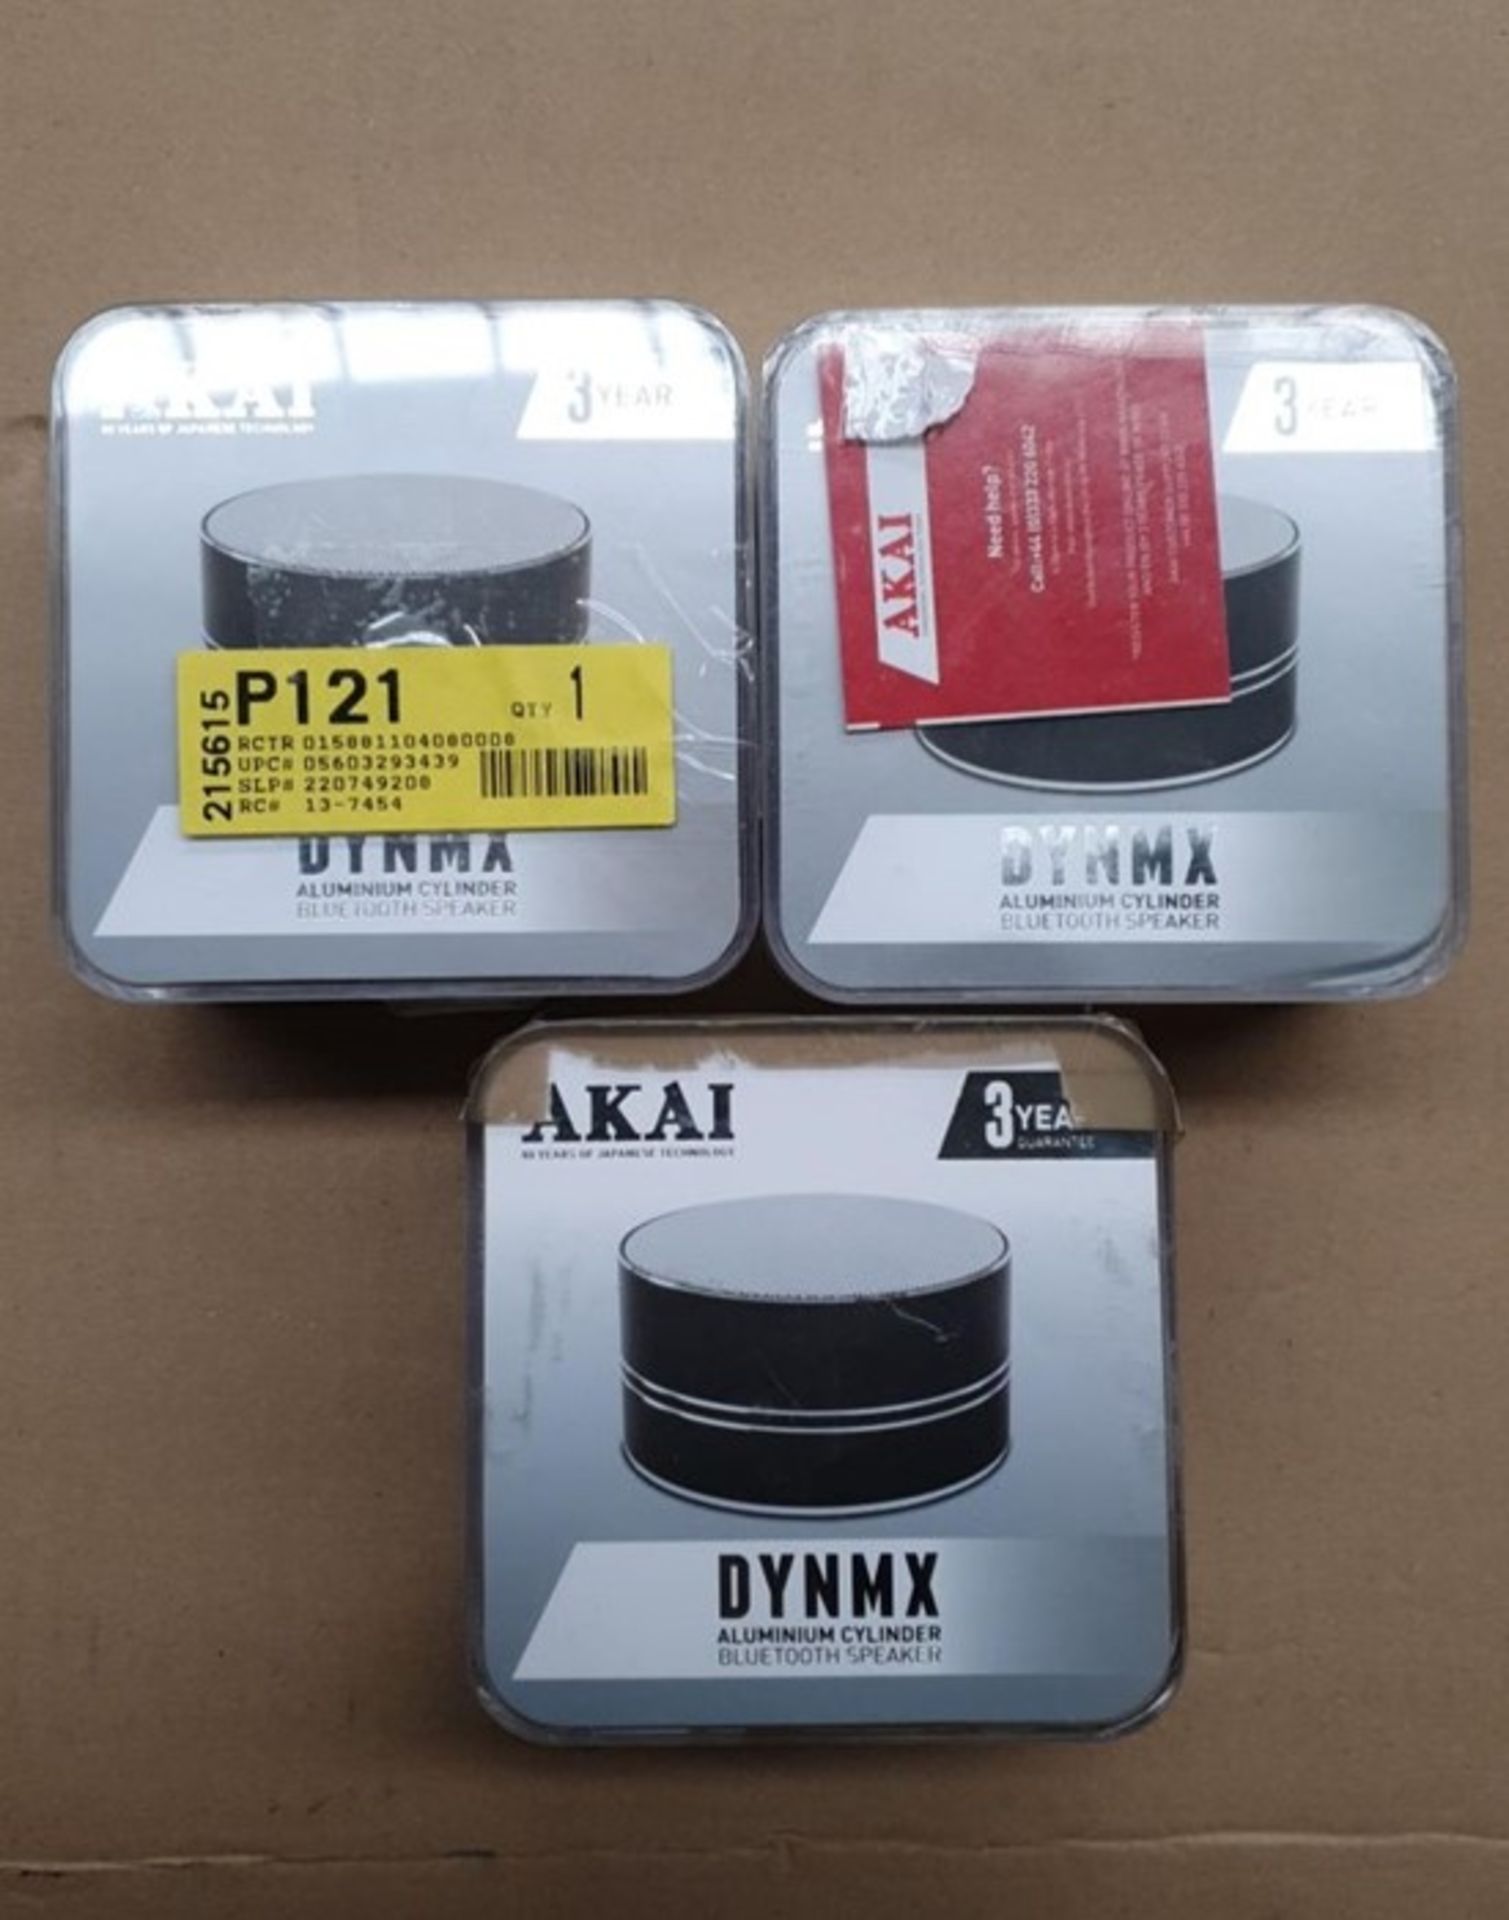 1 LOT TO CONTAIN 3 AKAI DYNMX ALUMINIUM CYLINDER BLUETOOTH SPEAKERS BLACK / BL -5615 / RRP £45.00 (